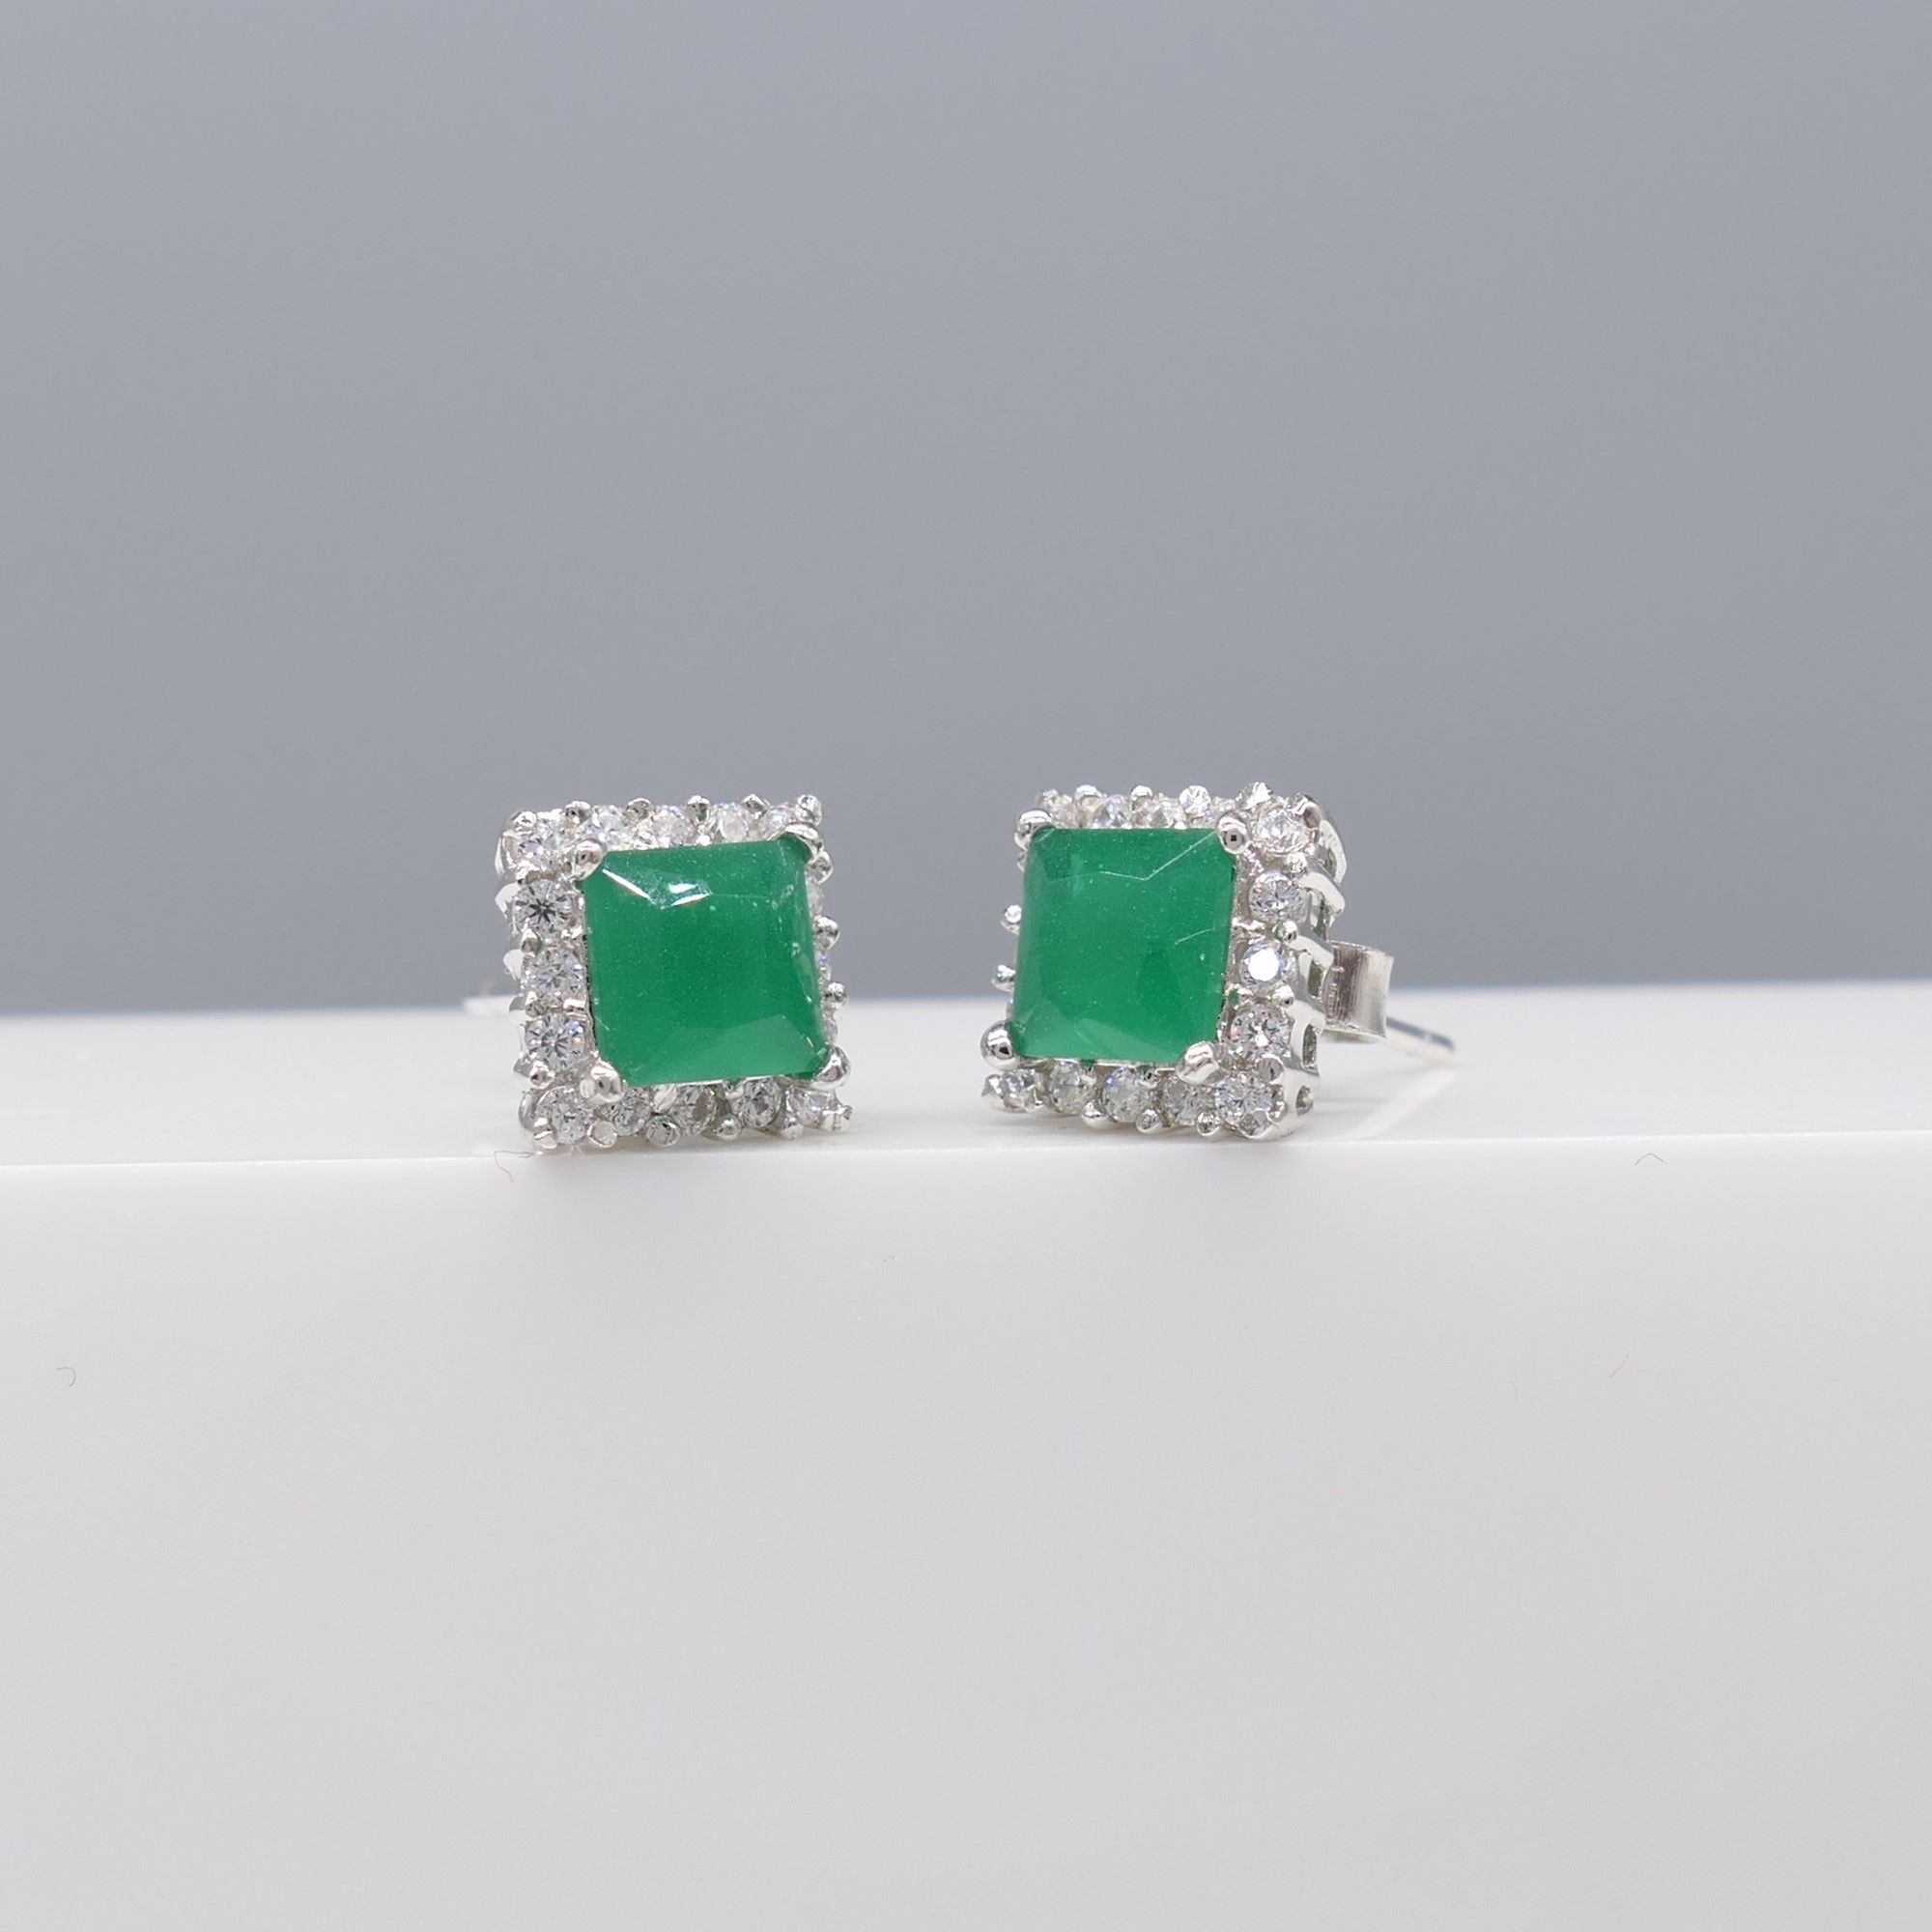 Pair of Silver Square-Set Green and White Cubic Zirconia Ear Studs